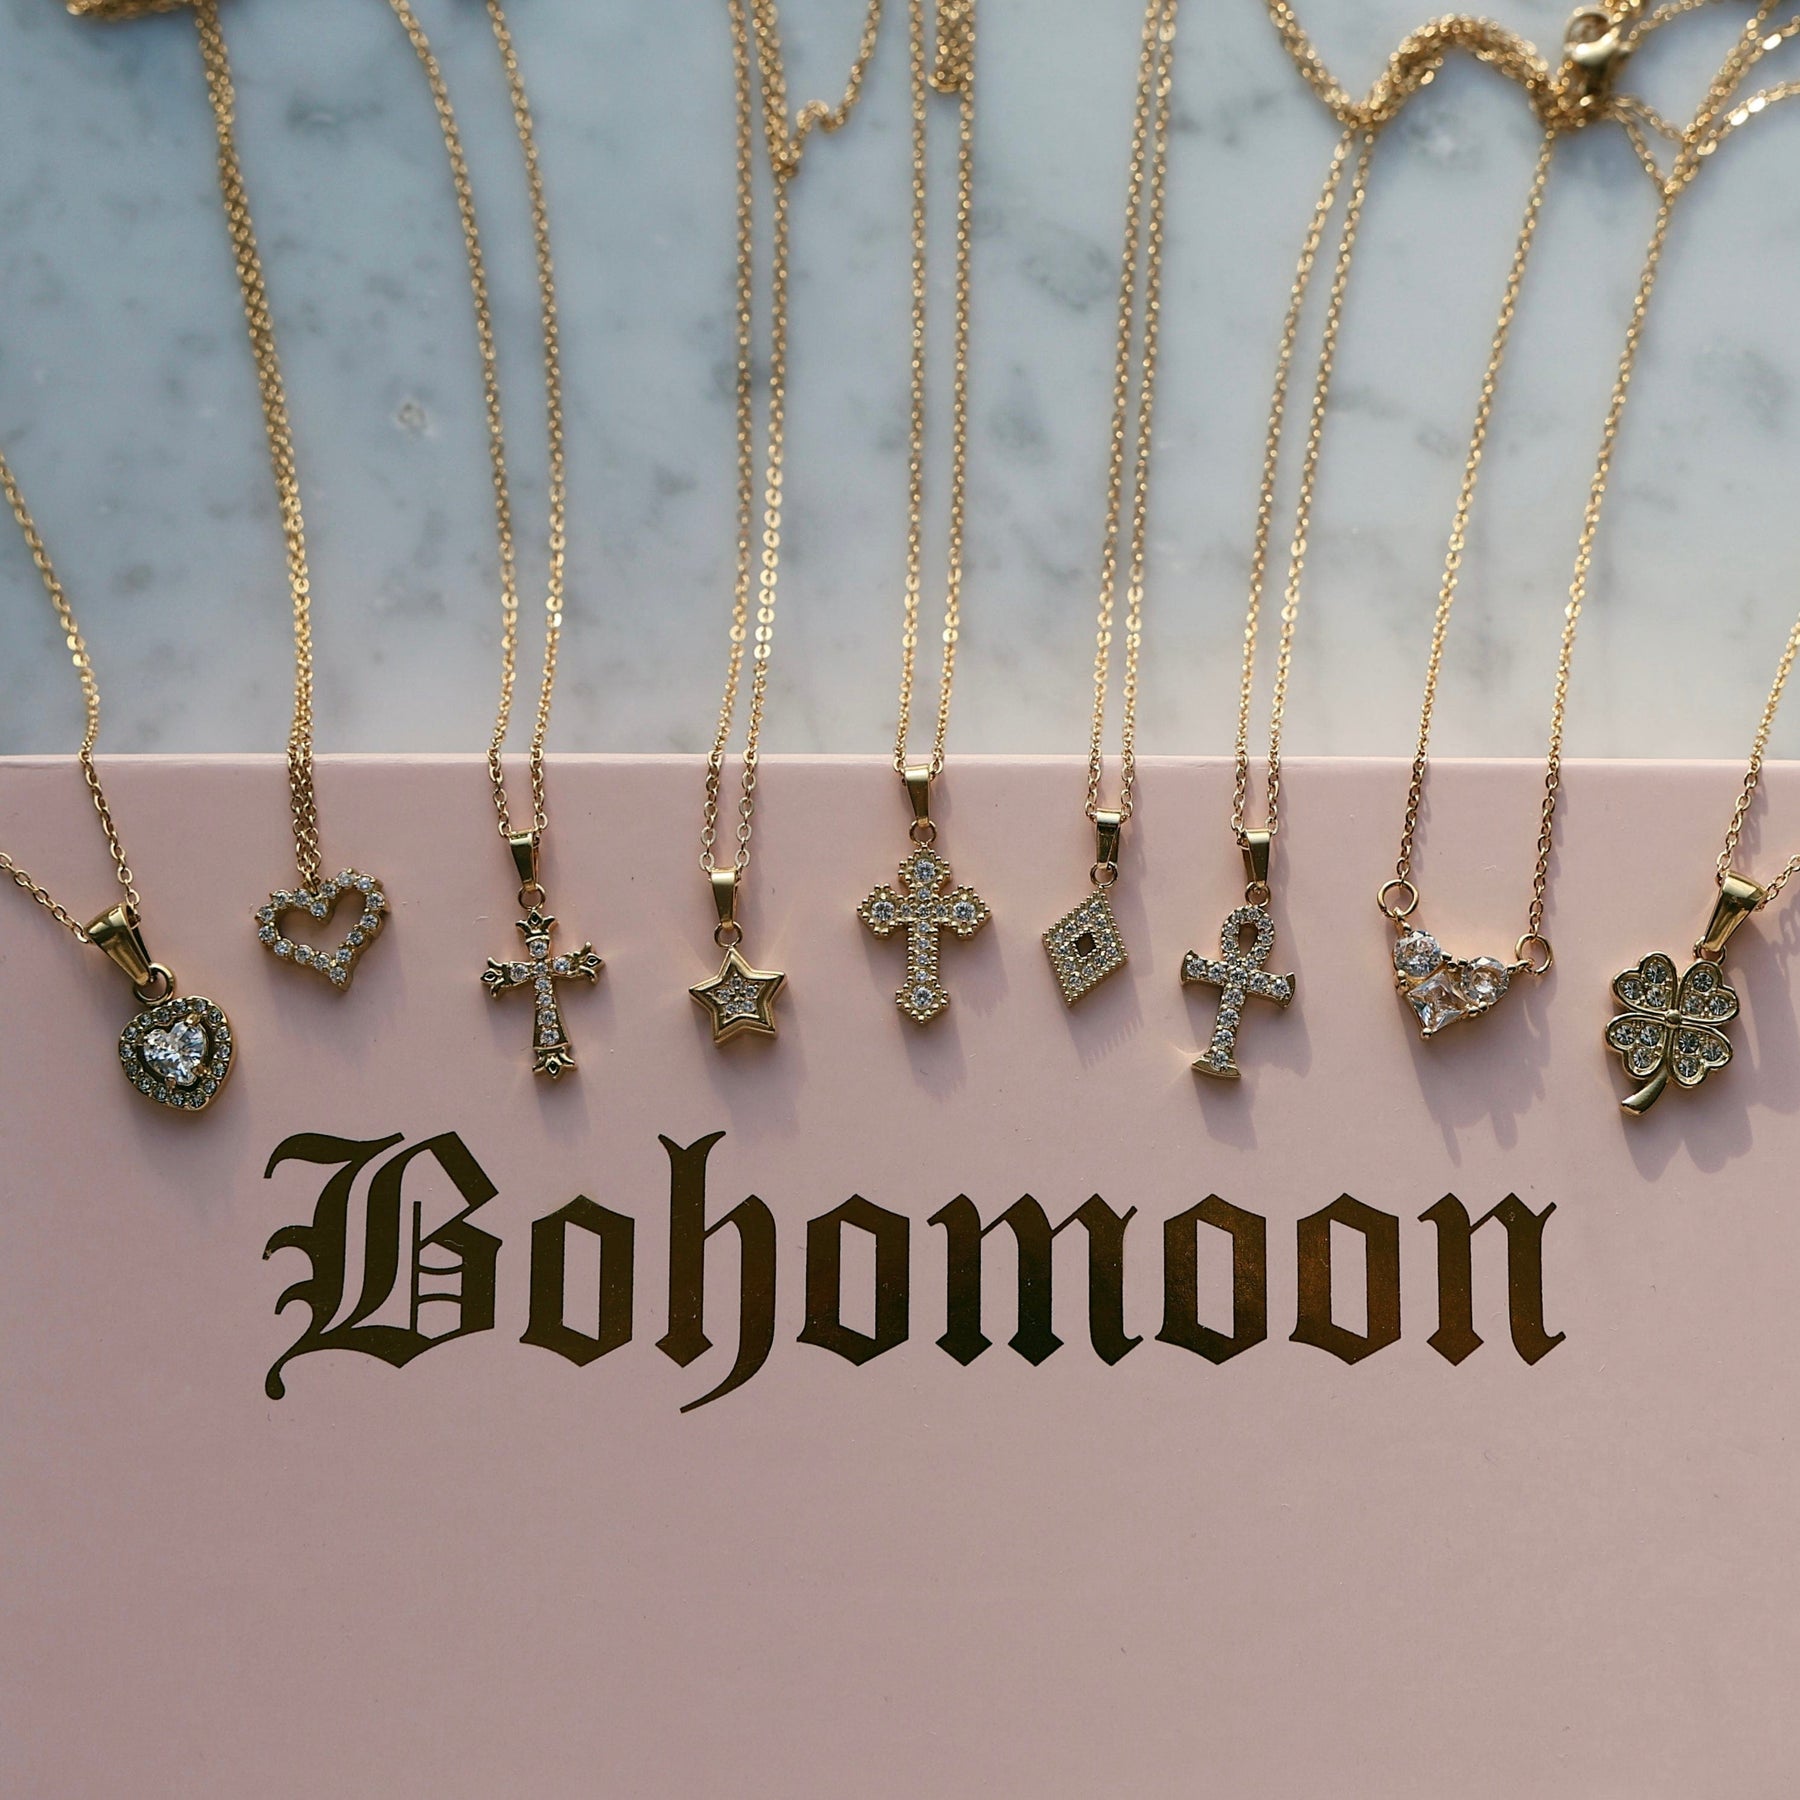 BohoMoon Stainless Steel Clover Necklace